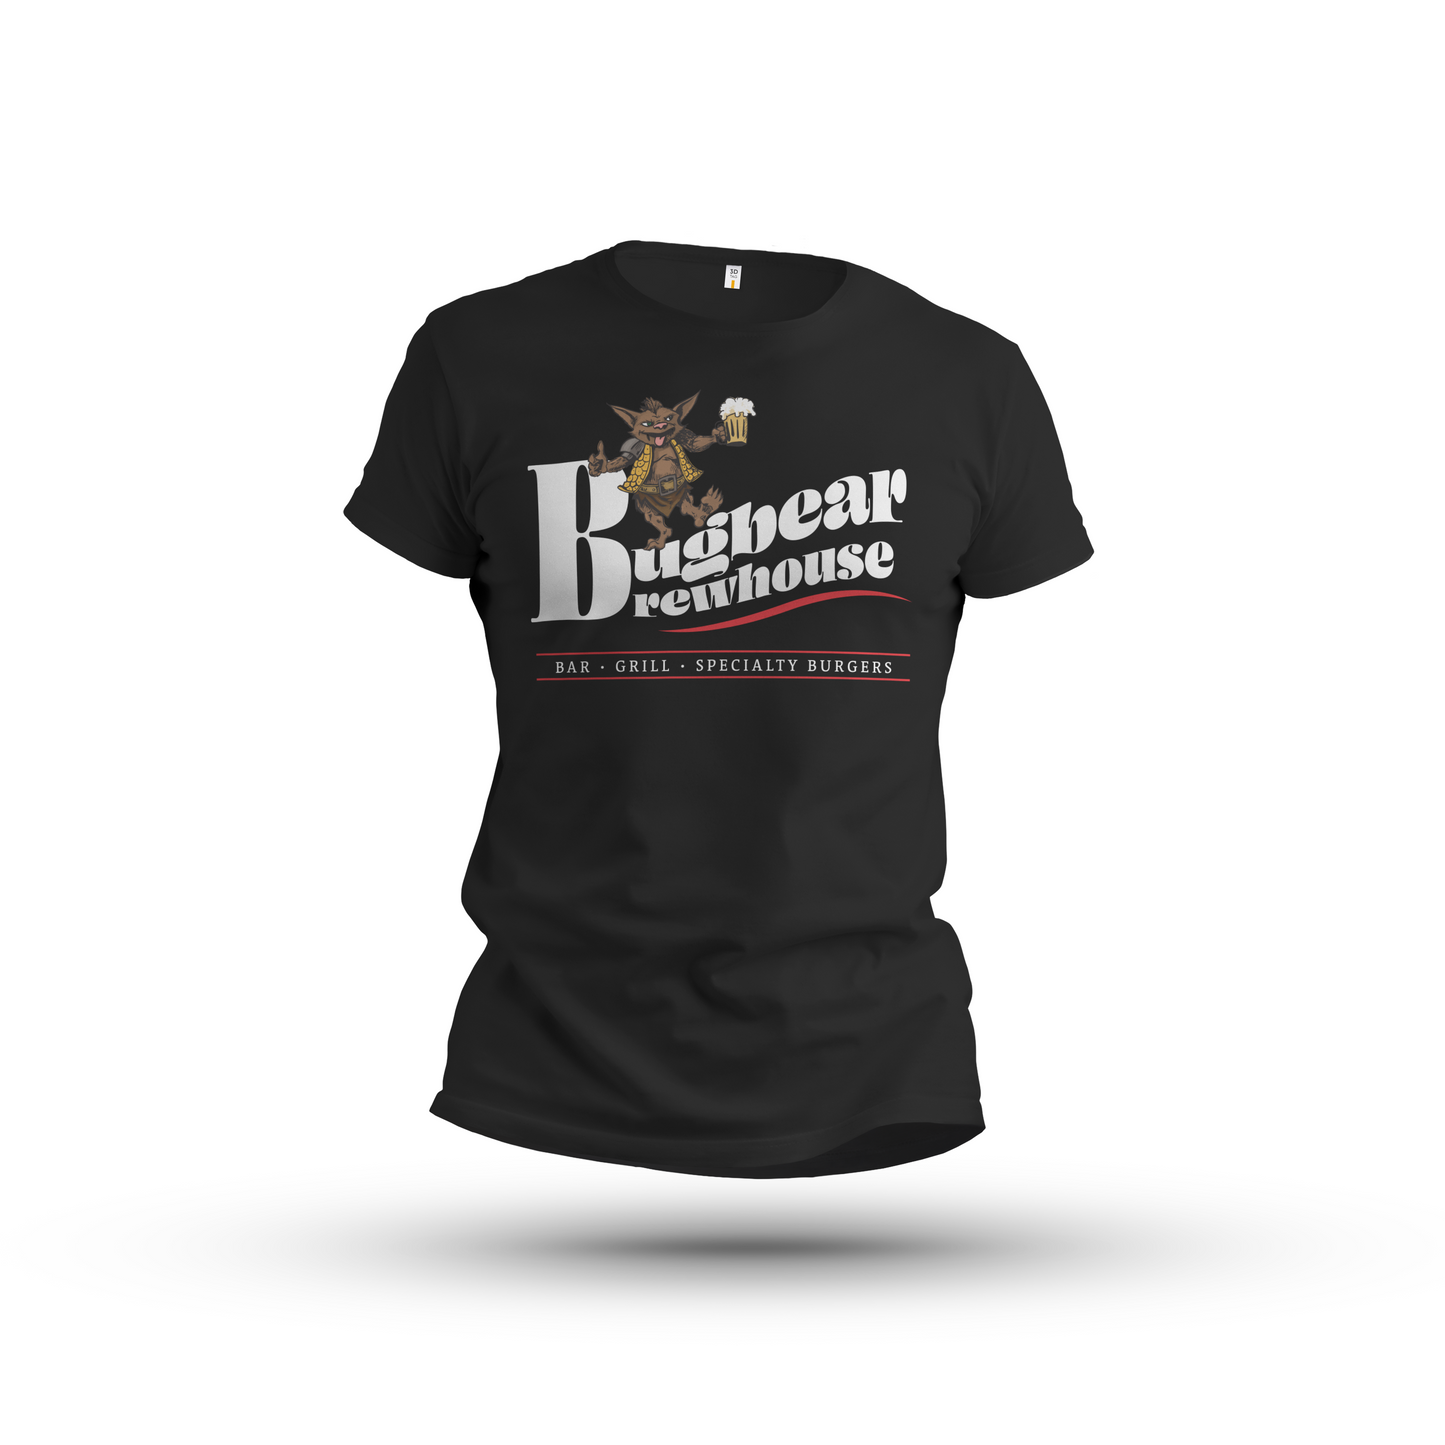 Bugbear Brewhouse T-Shirt